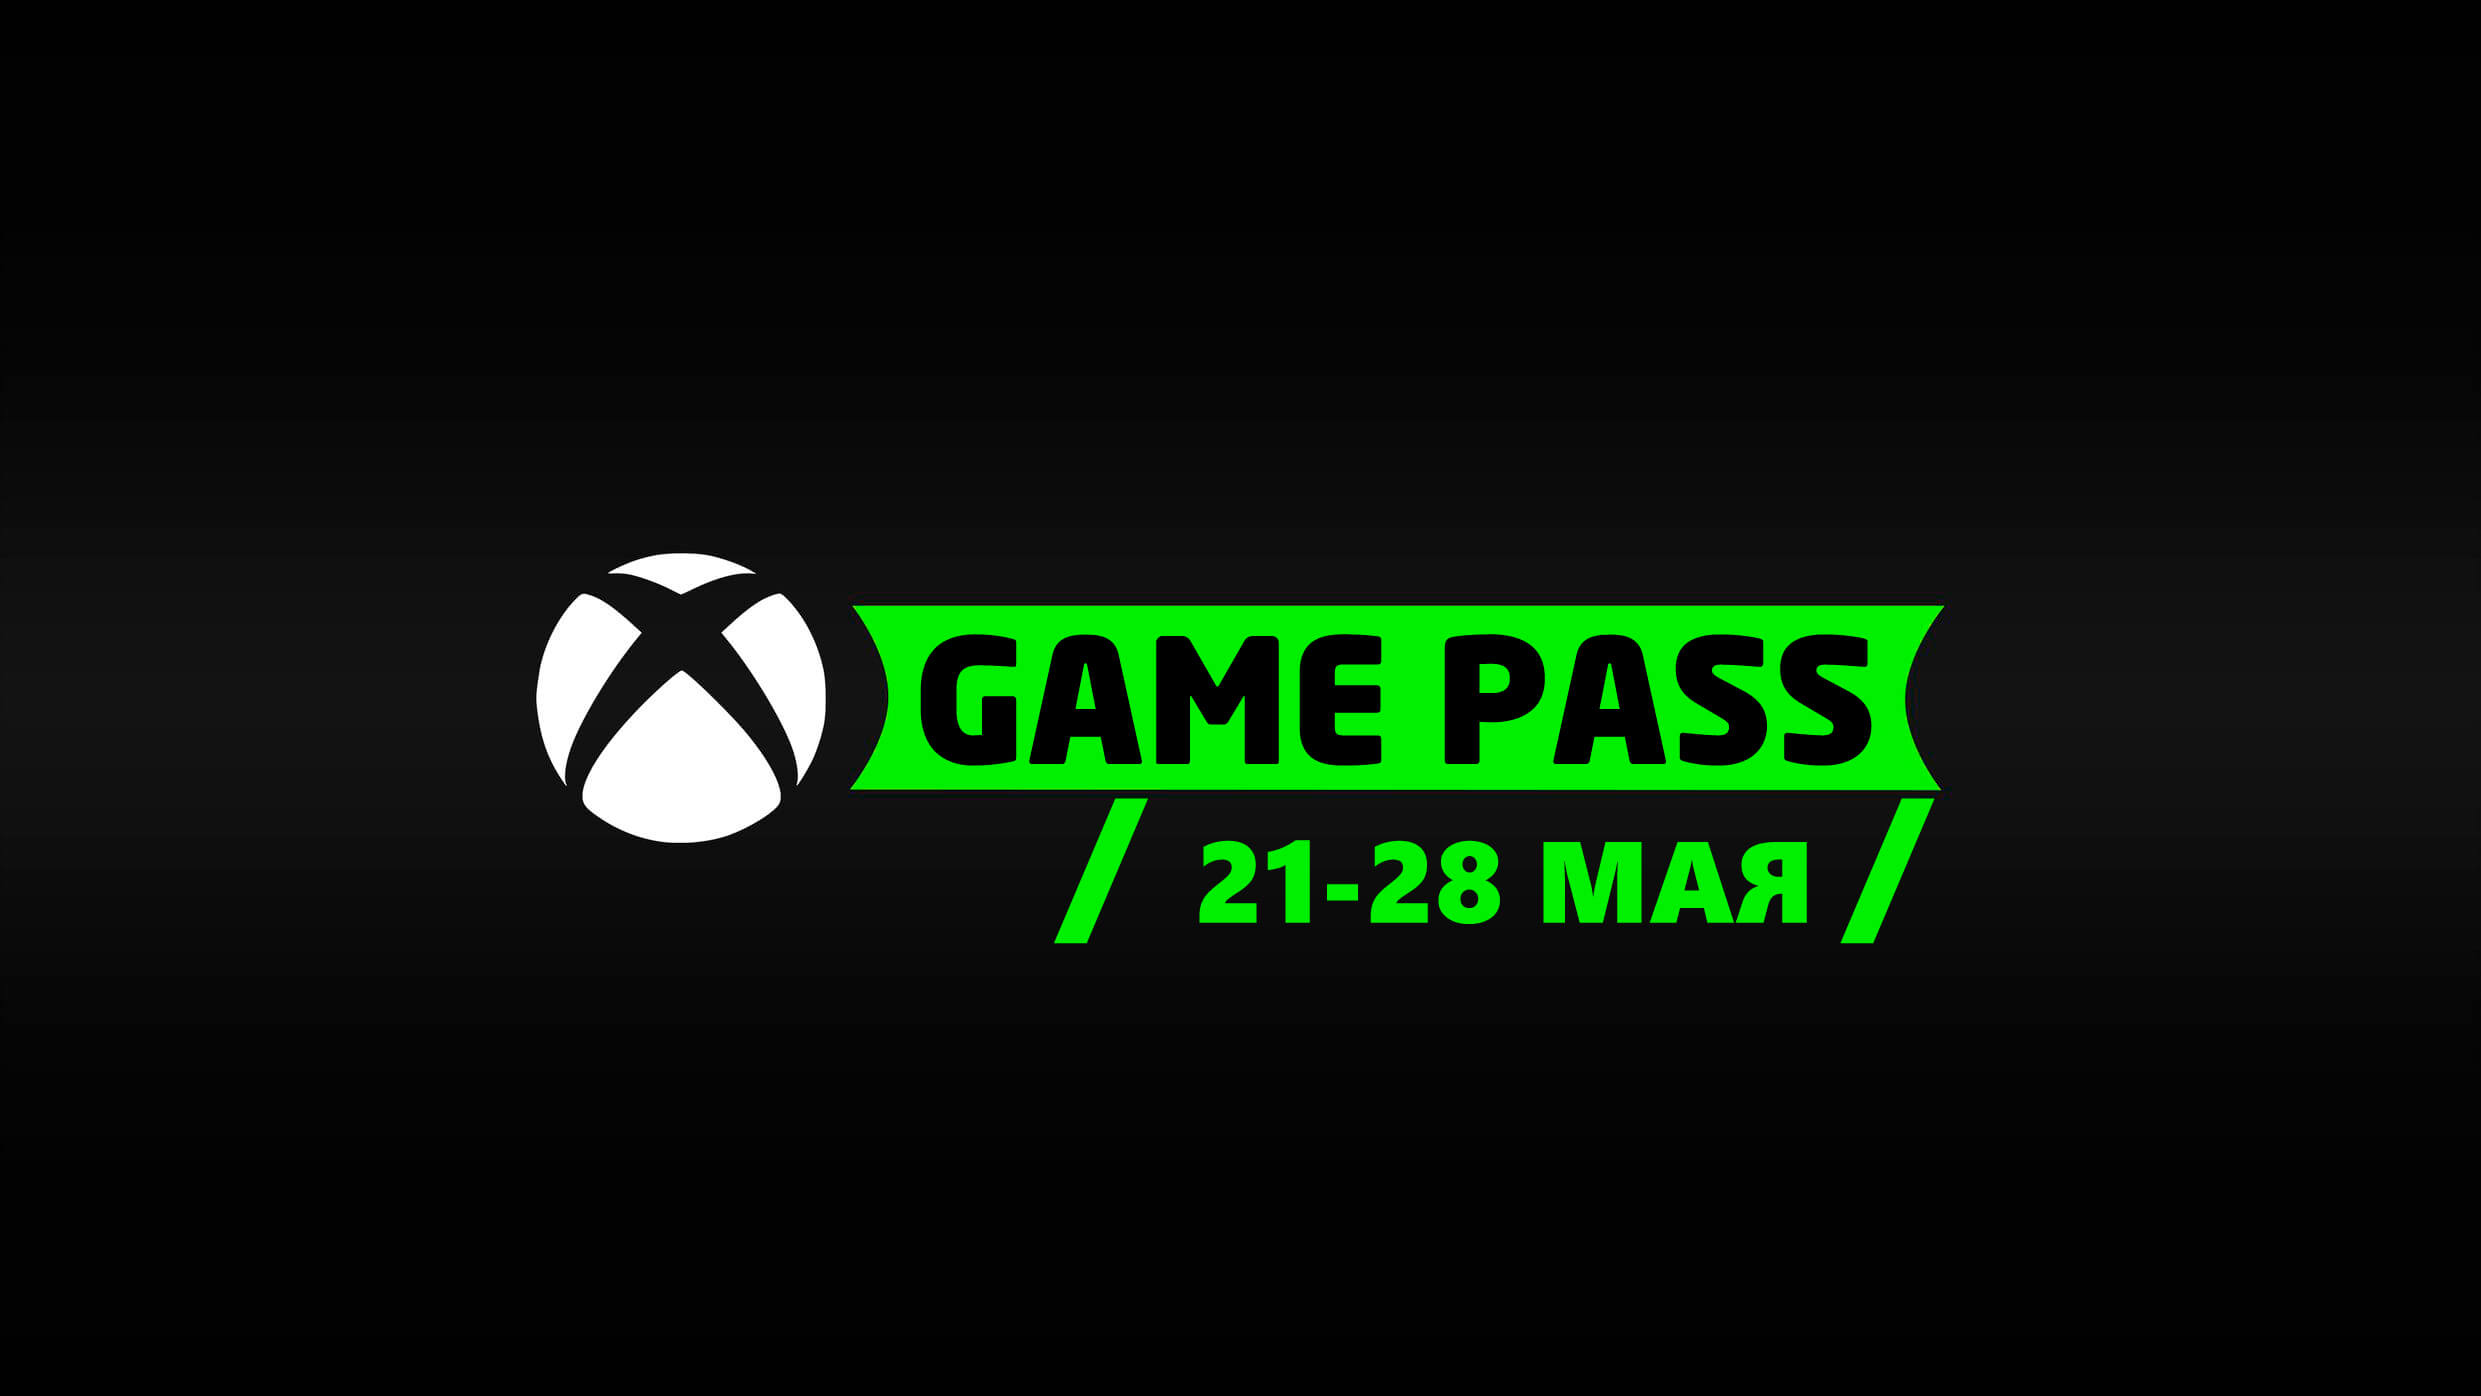 Game Pass News May 21-28: New Items, Announcements, Rumors & More